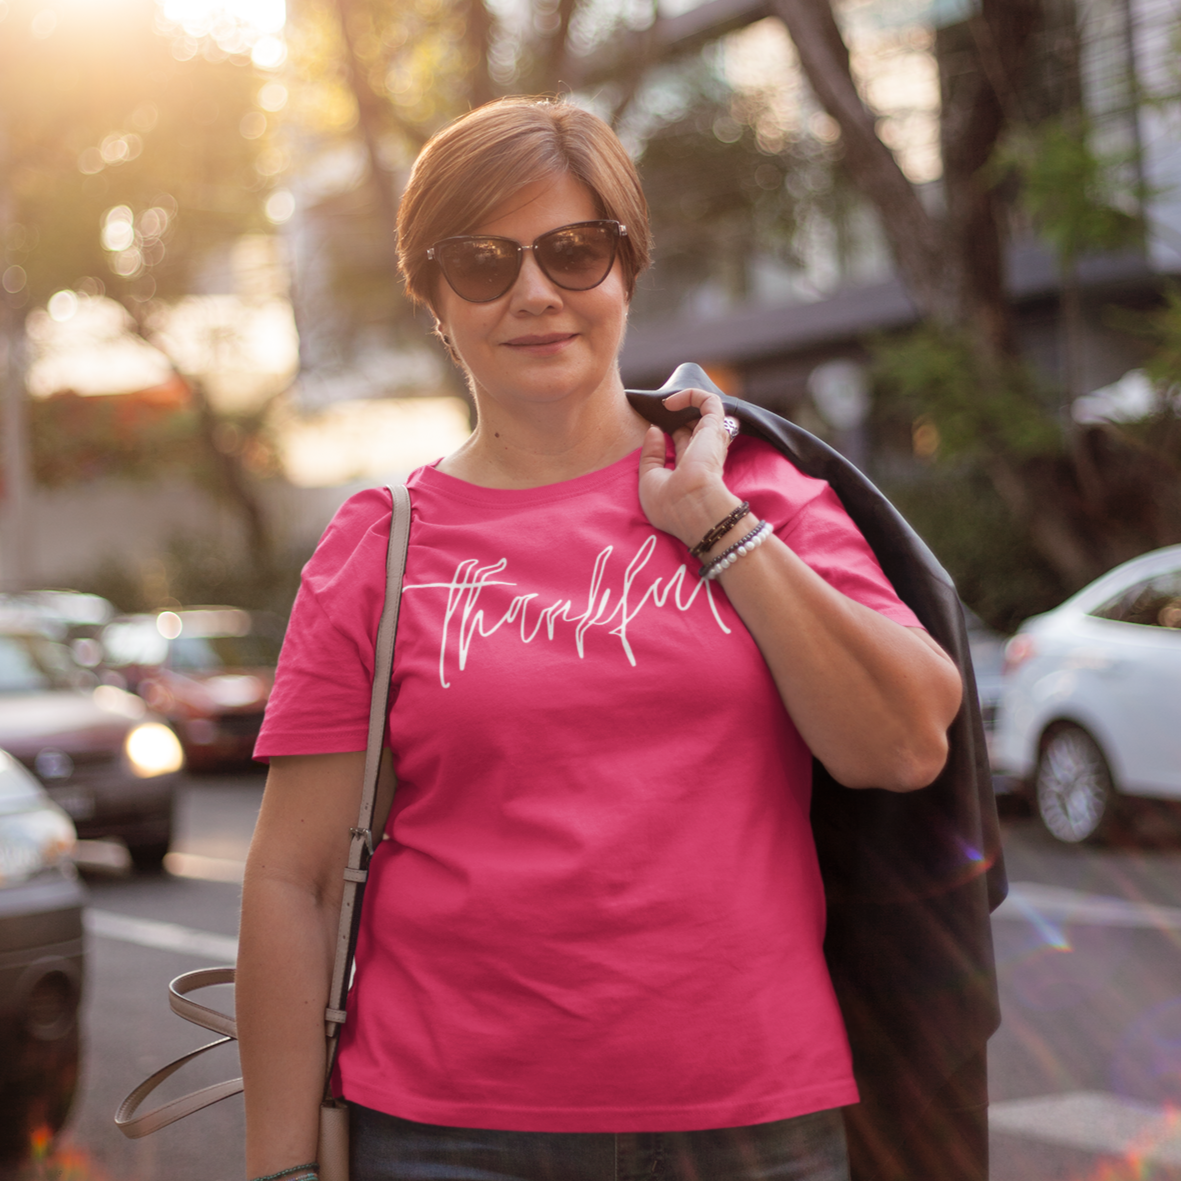 thankful-berry-t-shirt-womens-inspiring-middle-aged-woman-wearing-a-tee-mockup-carrying-a-jacket-on-her-back